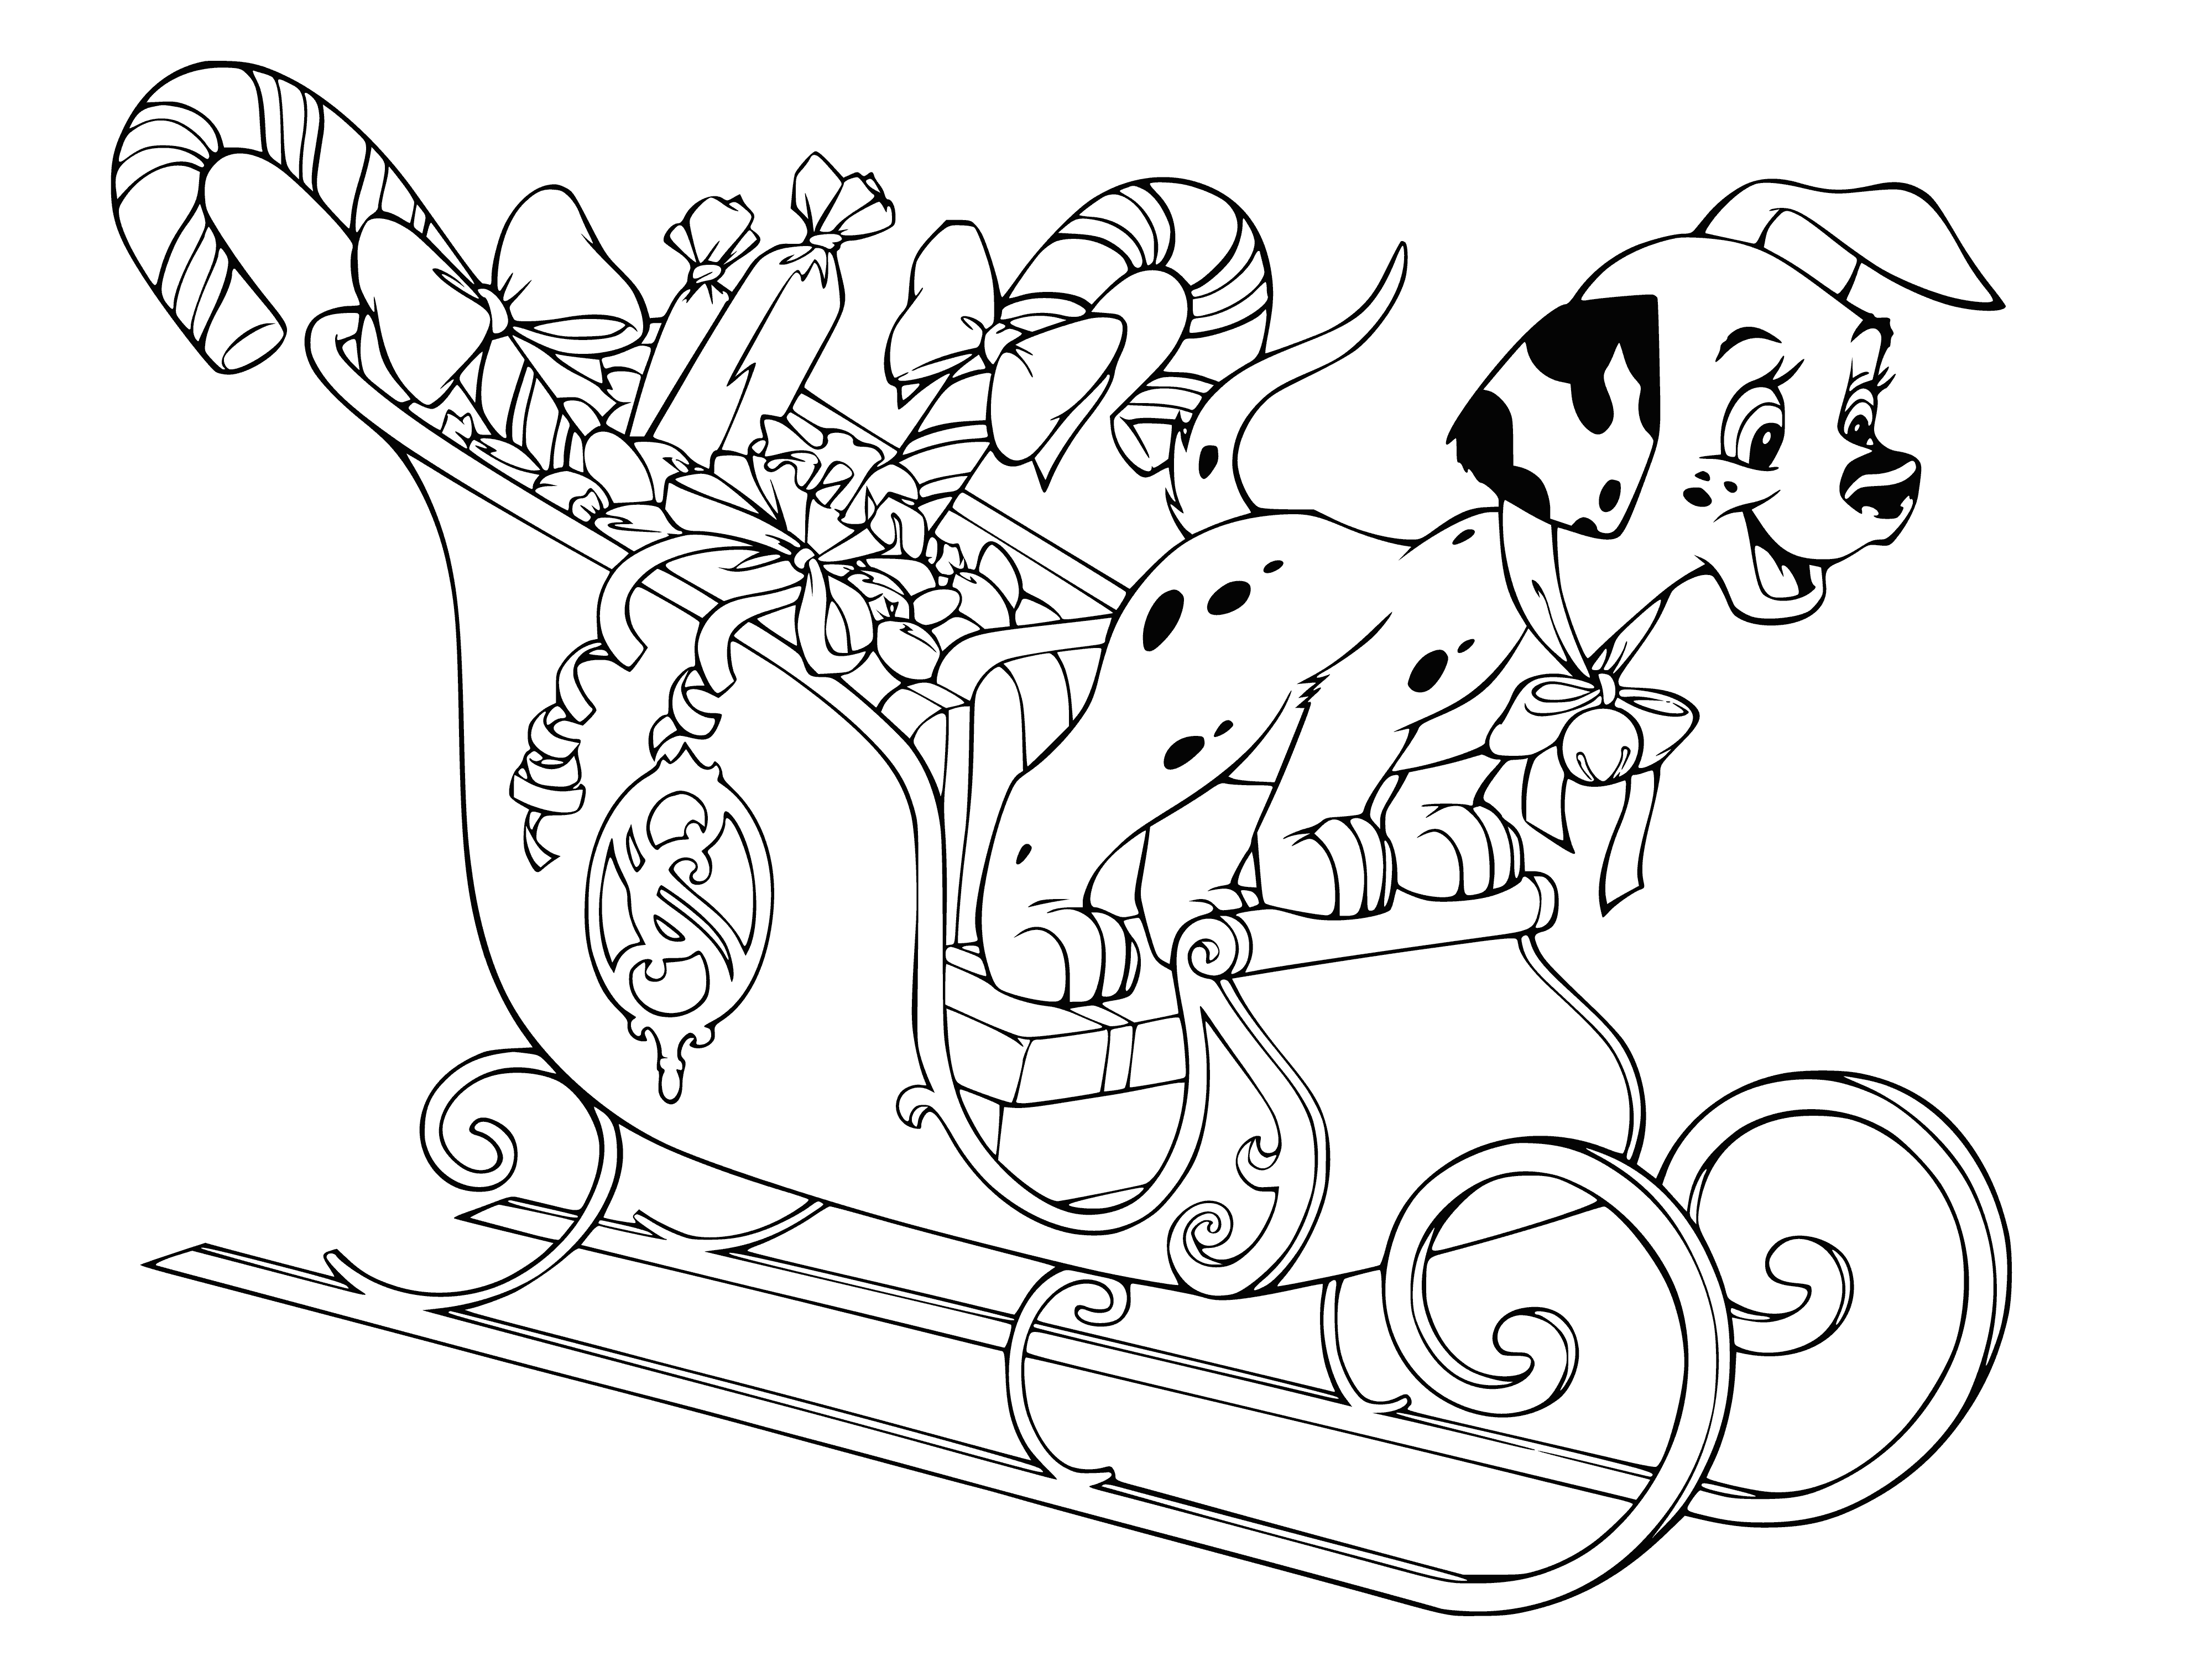 coloring page: Disney characters celebrate the new year by sleighing with gifts, all smiles and having a great time.